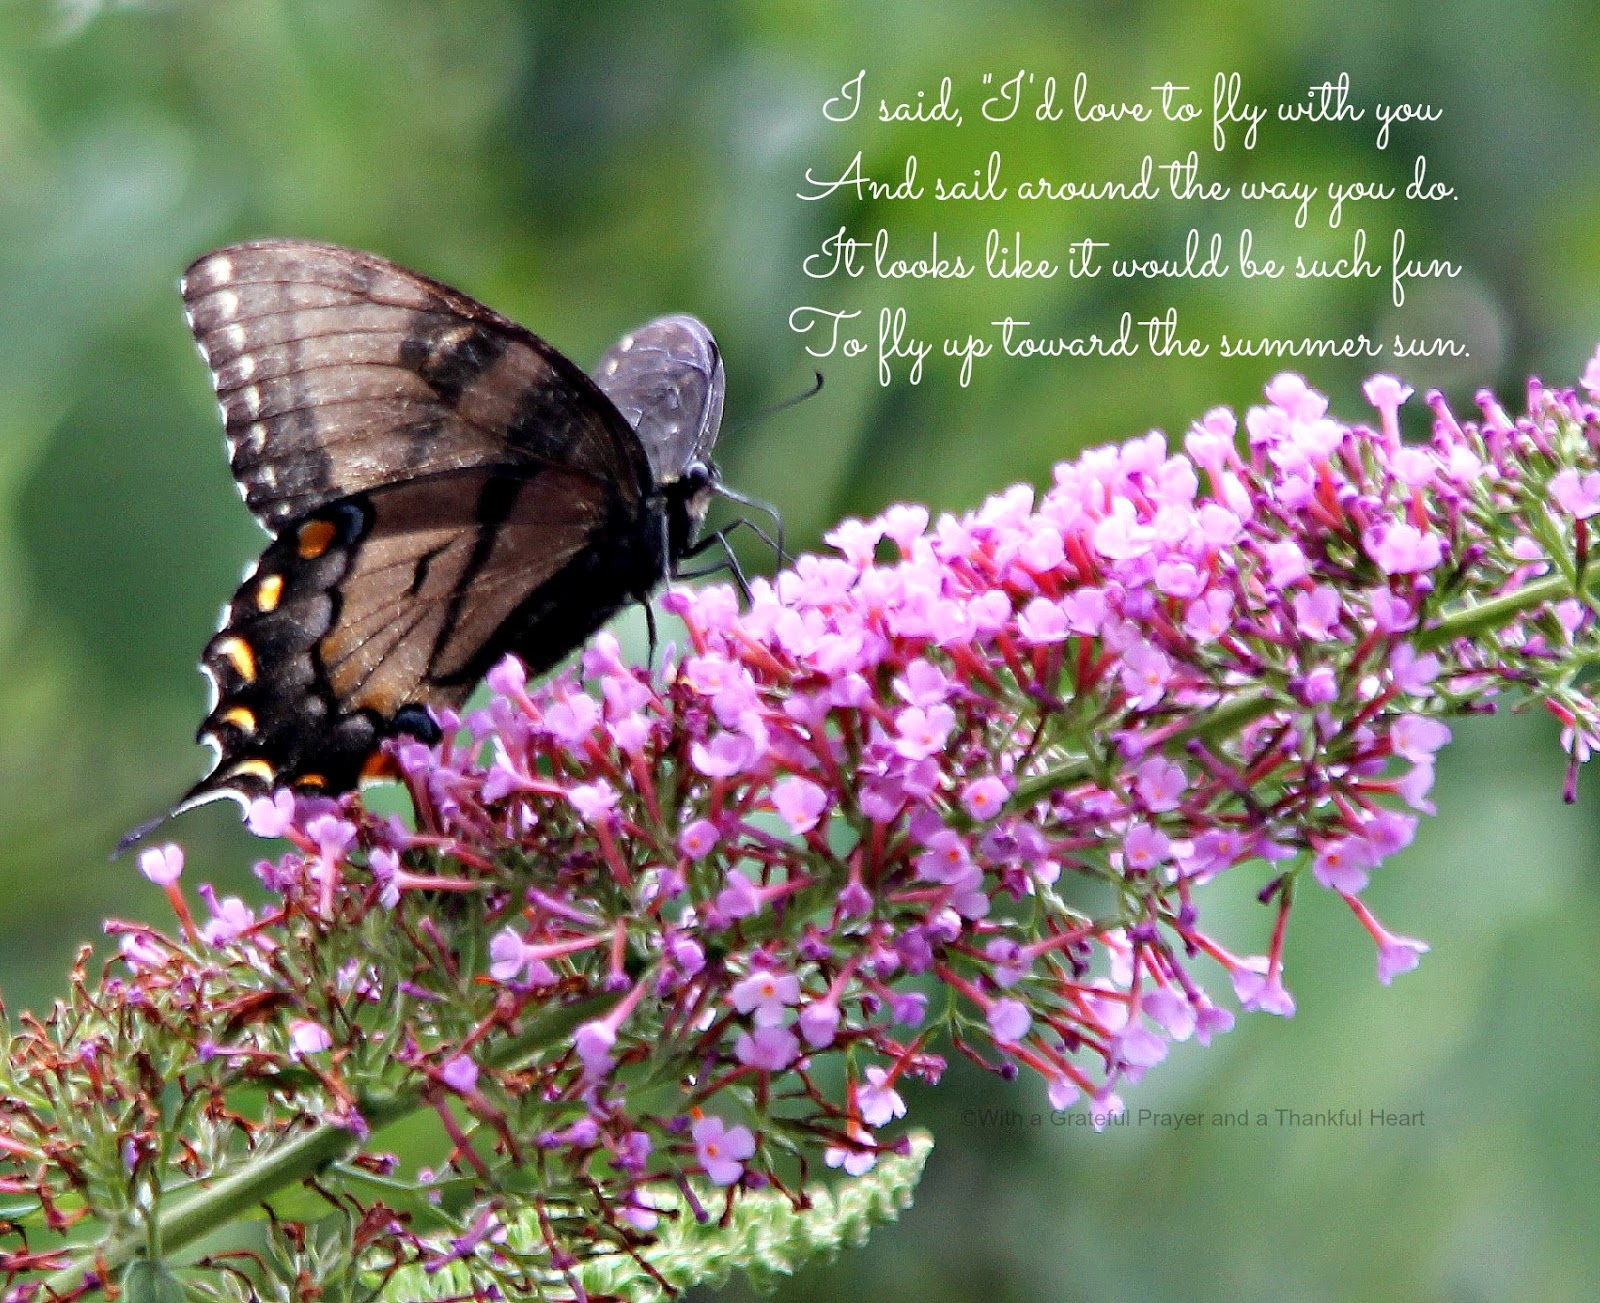 butterfly poems quotes mom spiritual poem yesterday heart grateful prayer swallowtail quotesgram thankful advertisement